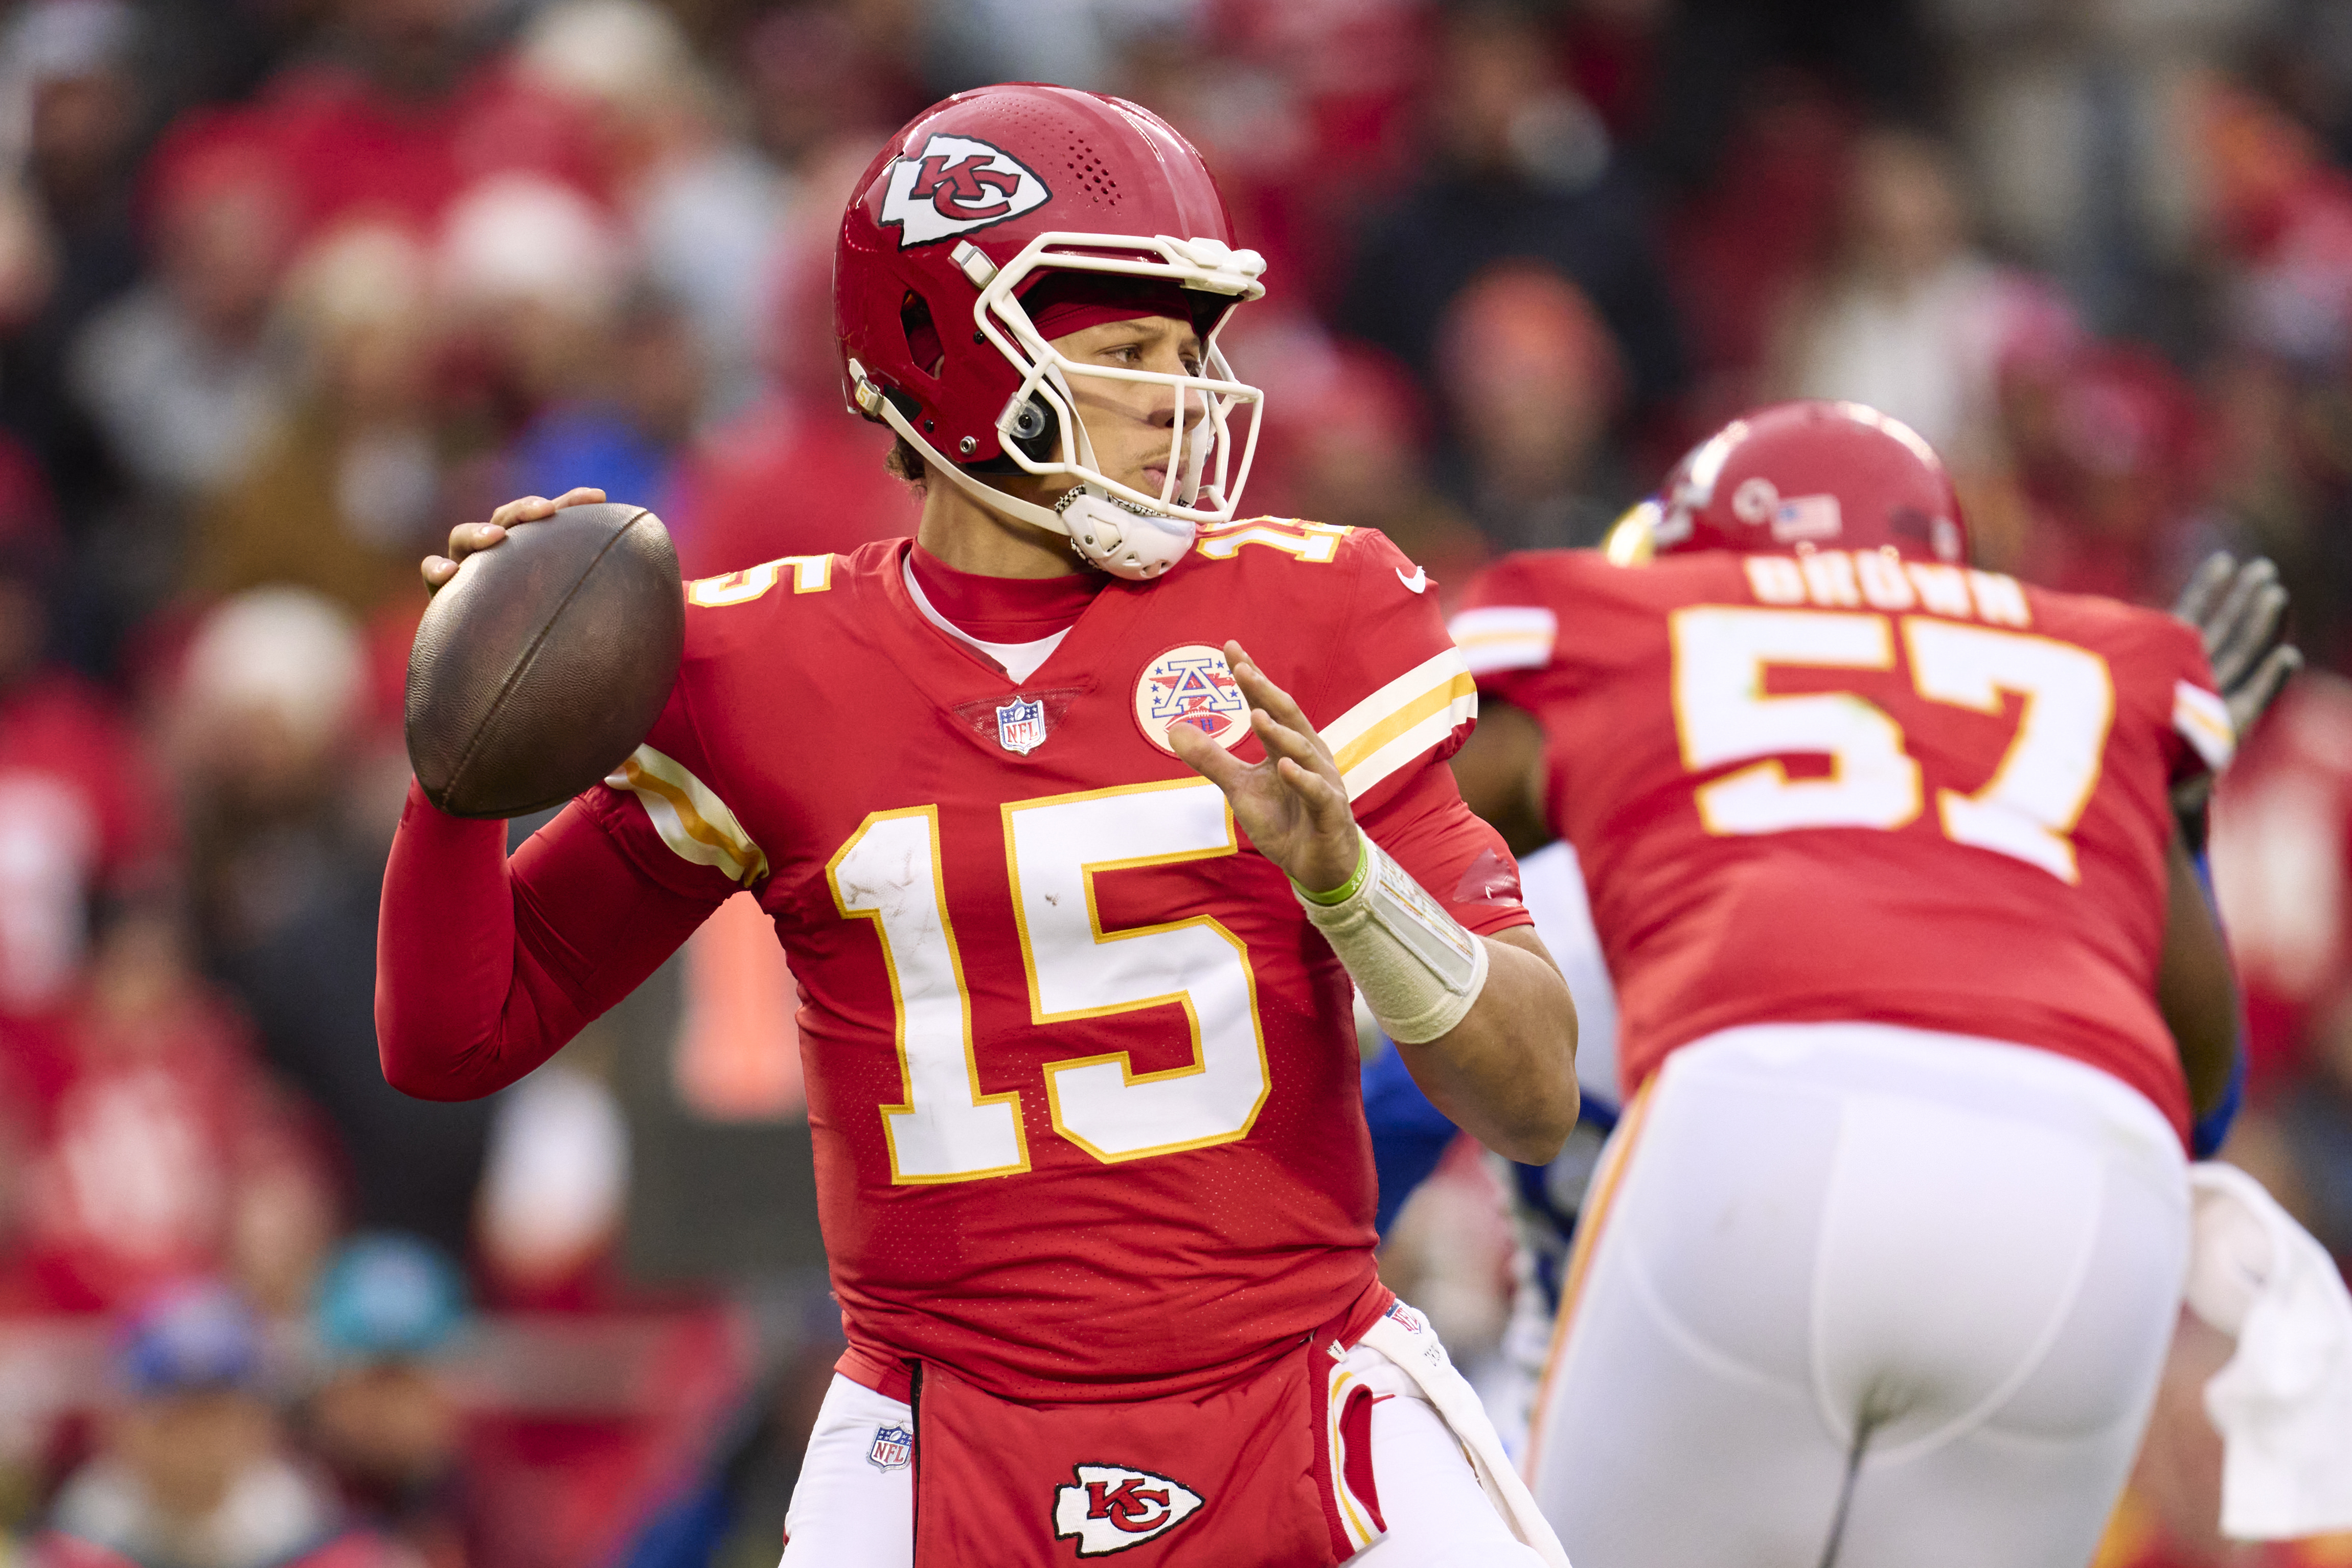 Patrick Mahomes #15 of the Kansas City Chiefs drops back to pass against the Los Angeles Rams during the first half at GEHA Field at Arrowhead Stadium on November 27, 2022 in Kansas City, Missouri.